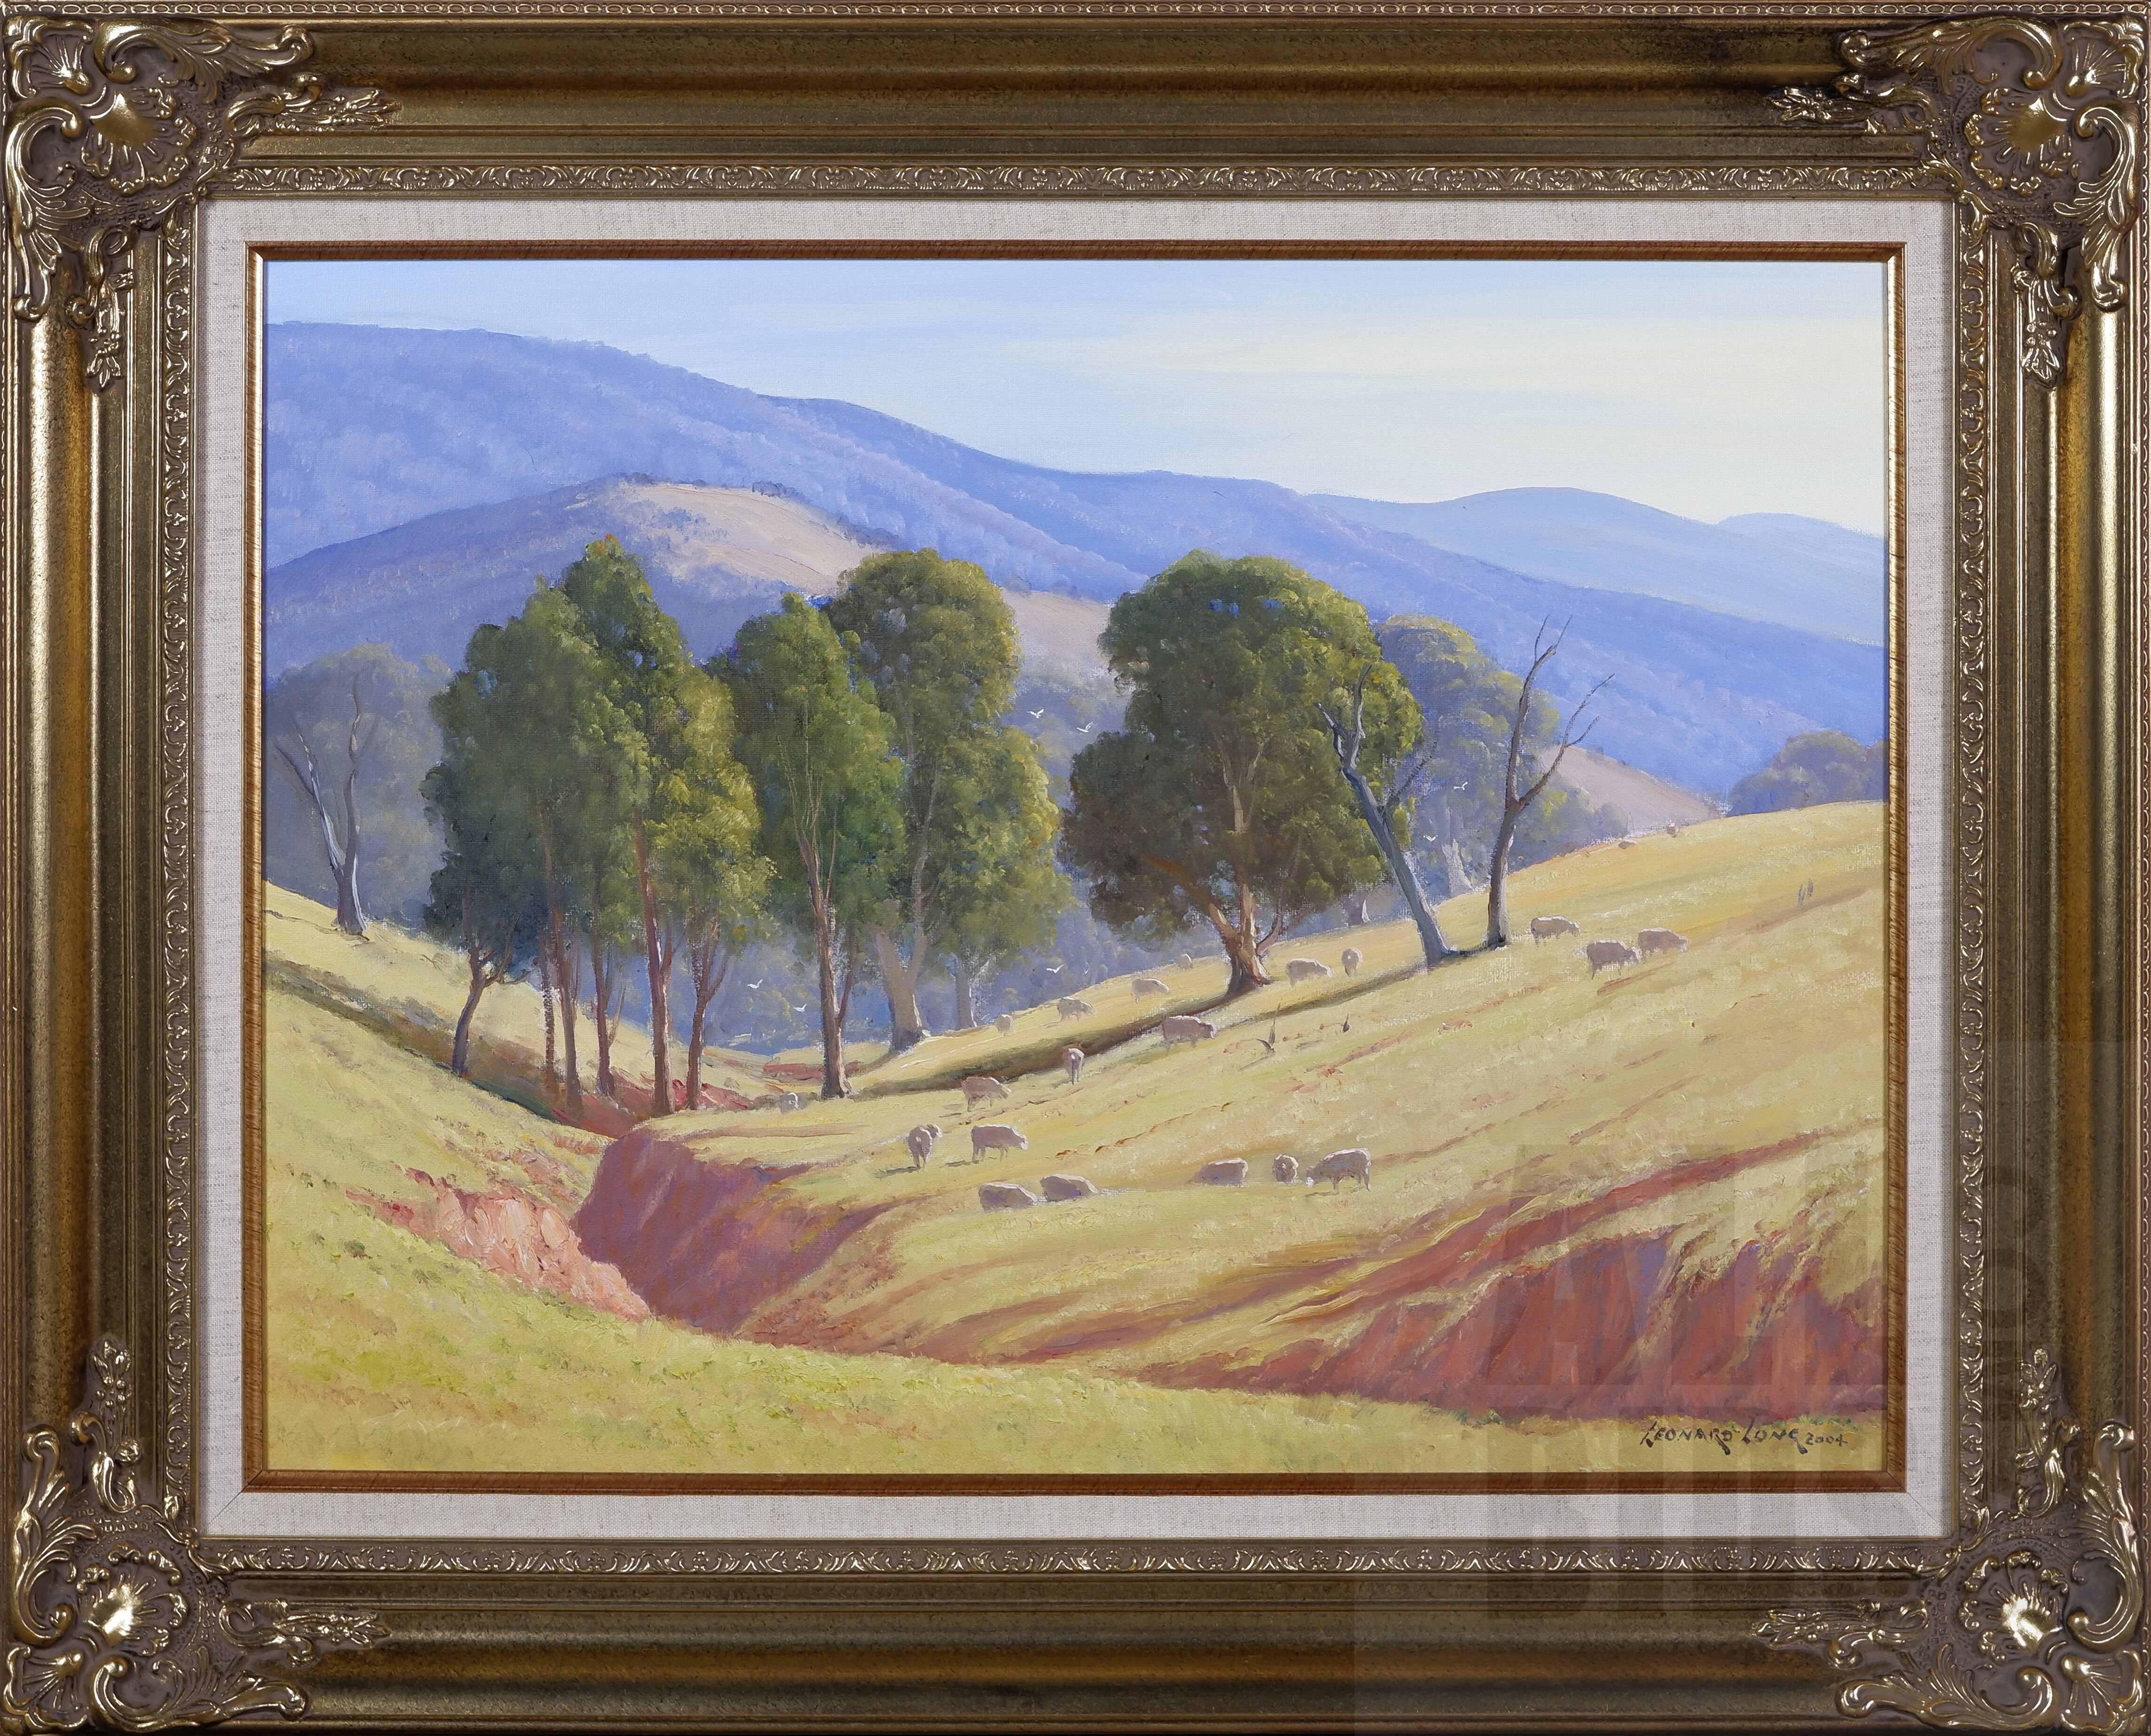 'Leonard Long (1911-2013), In the Hills At Cookmundoon, Wee Jasper, New South Wales 2004, Oil On Canvas on Board, 44.5 x 60 cm'